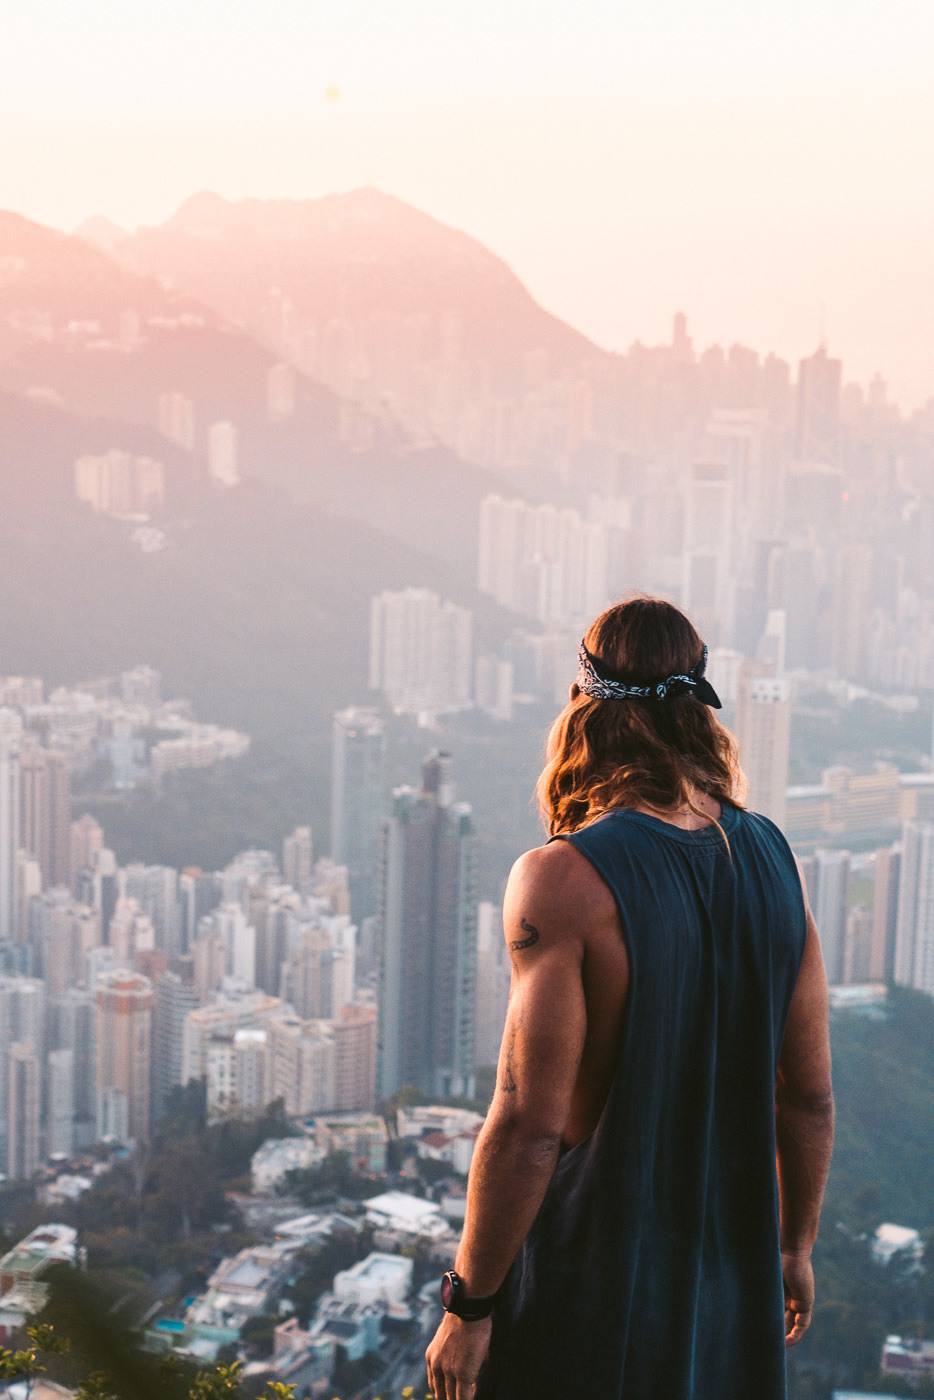 a man standing on top of a mountain looking at a city.